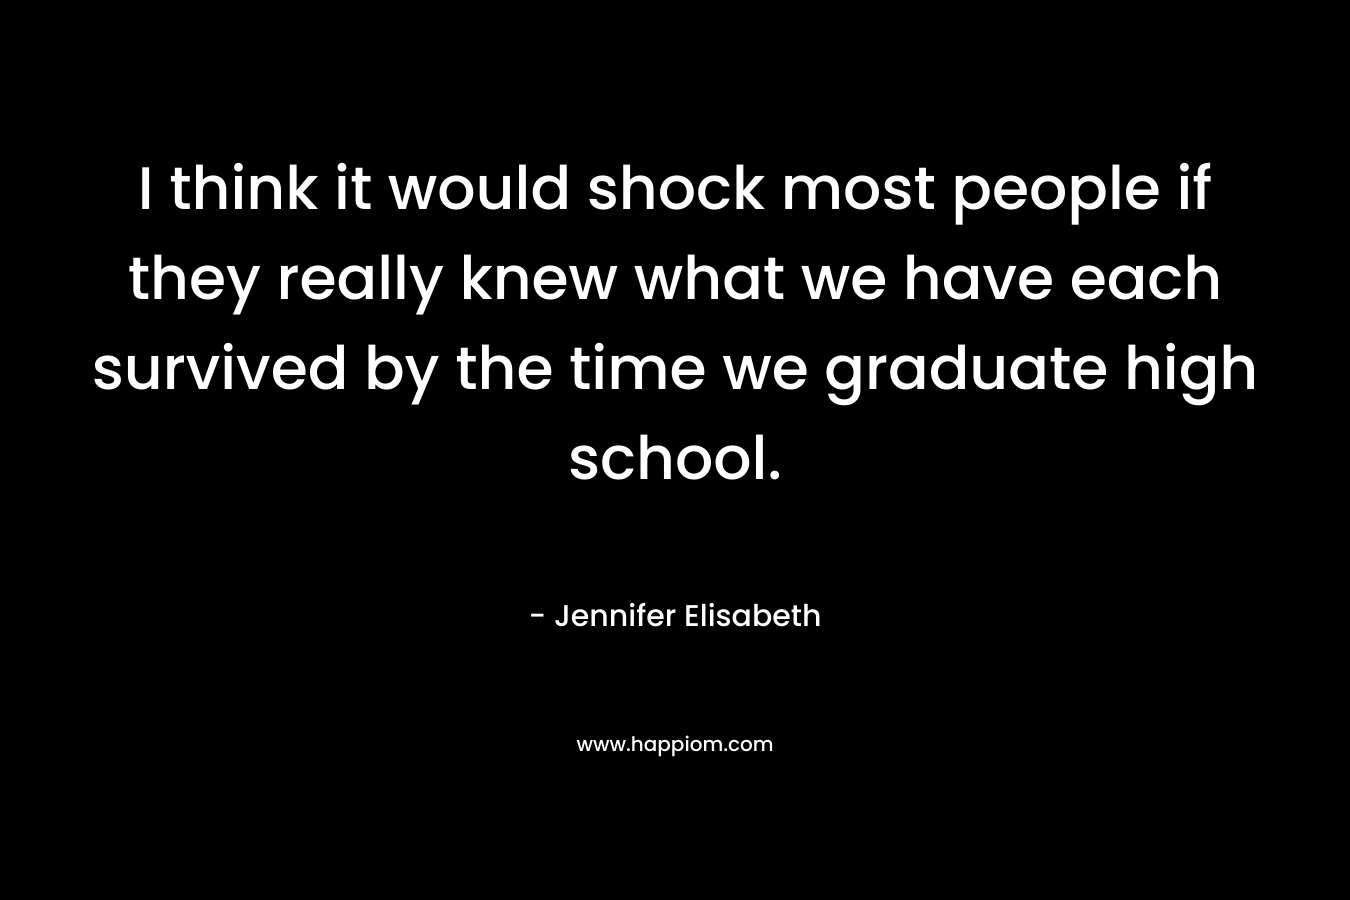 I think it would shock most people if they really knew what we have each survived by the time we graduate high school.